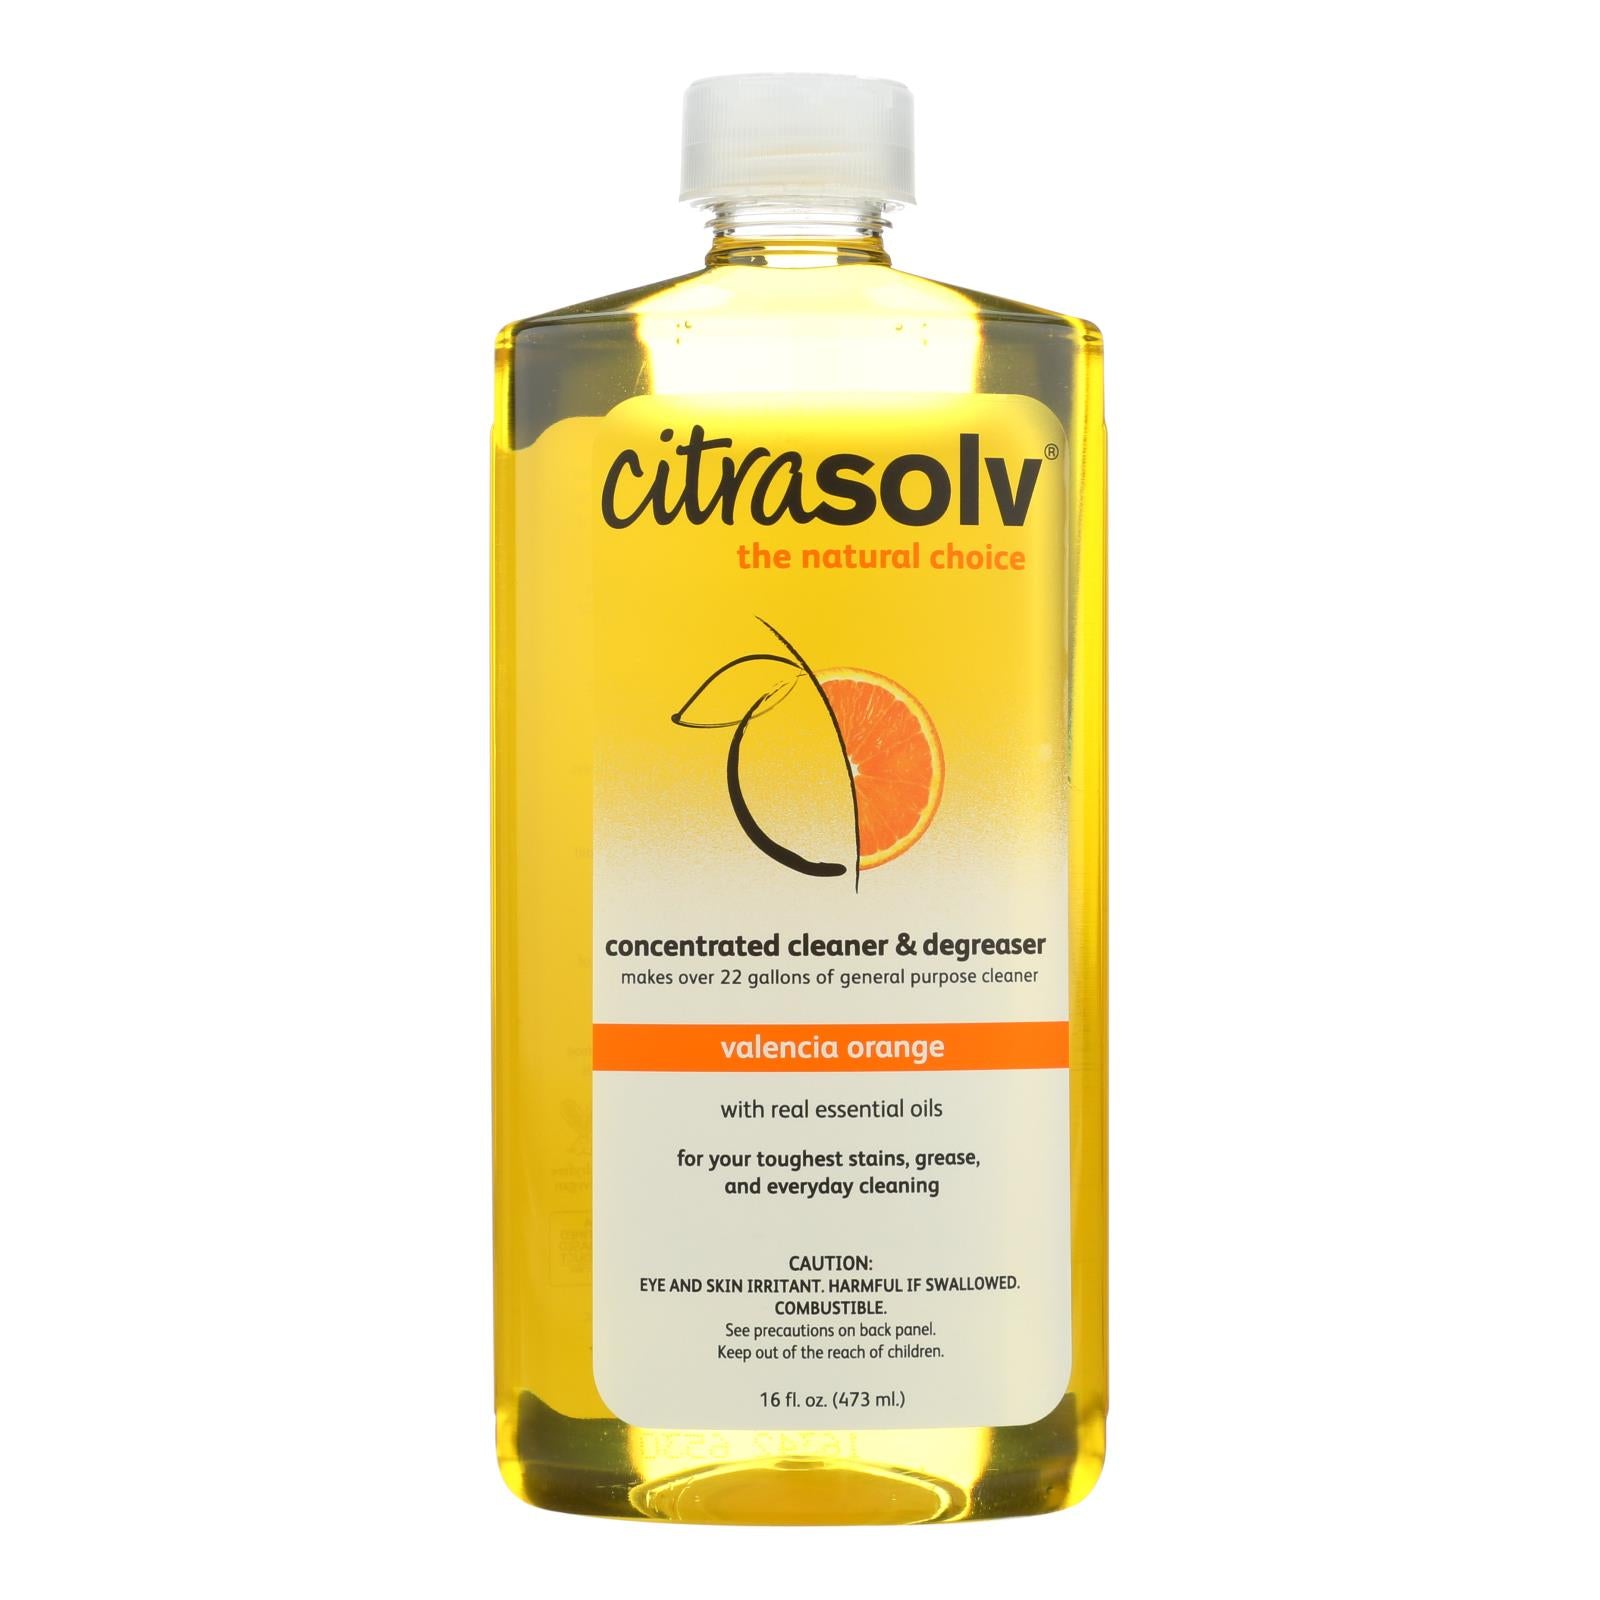 Citrasolv Natural Cleaner and Degreaser Concentrate (Pack of 16 Oz) -  Valencia Orange